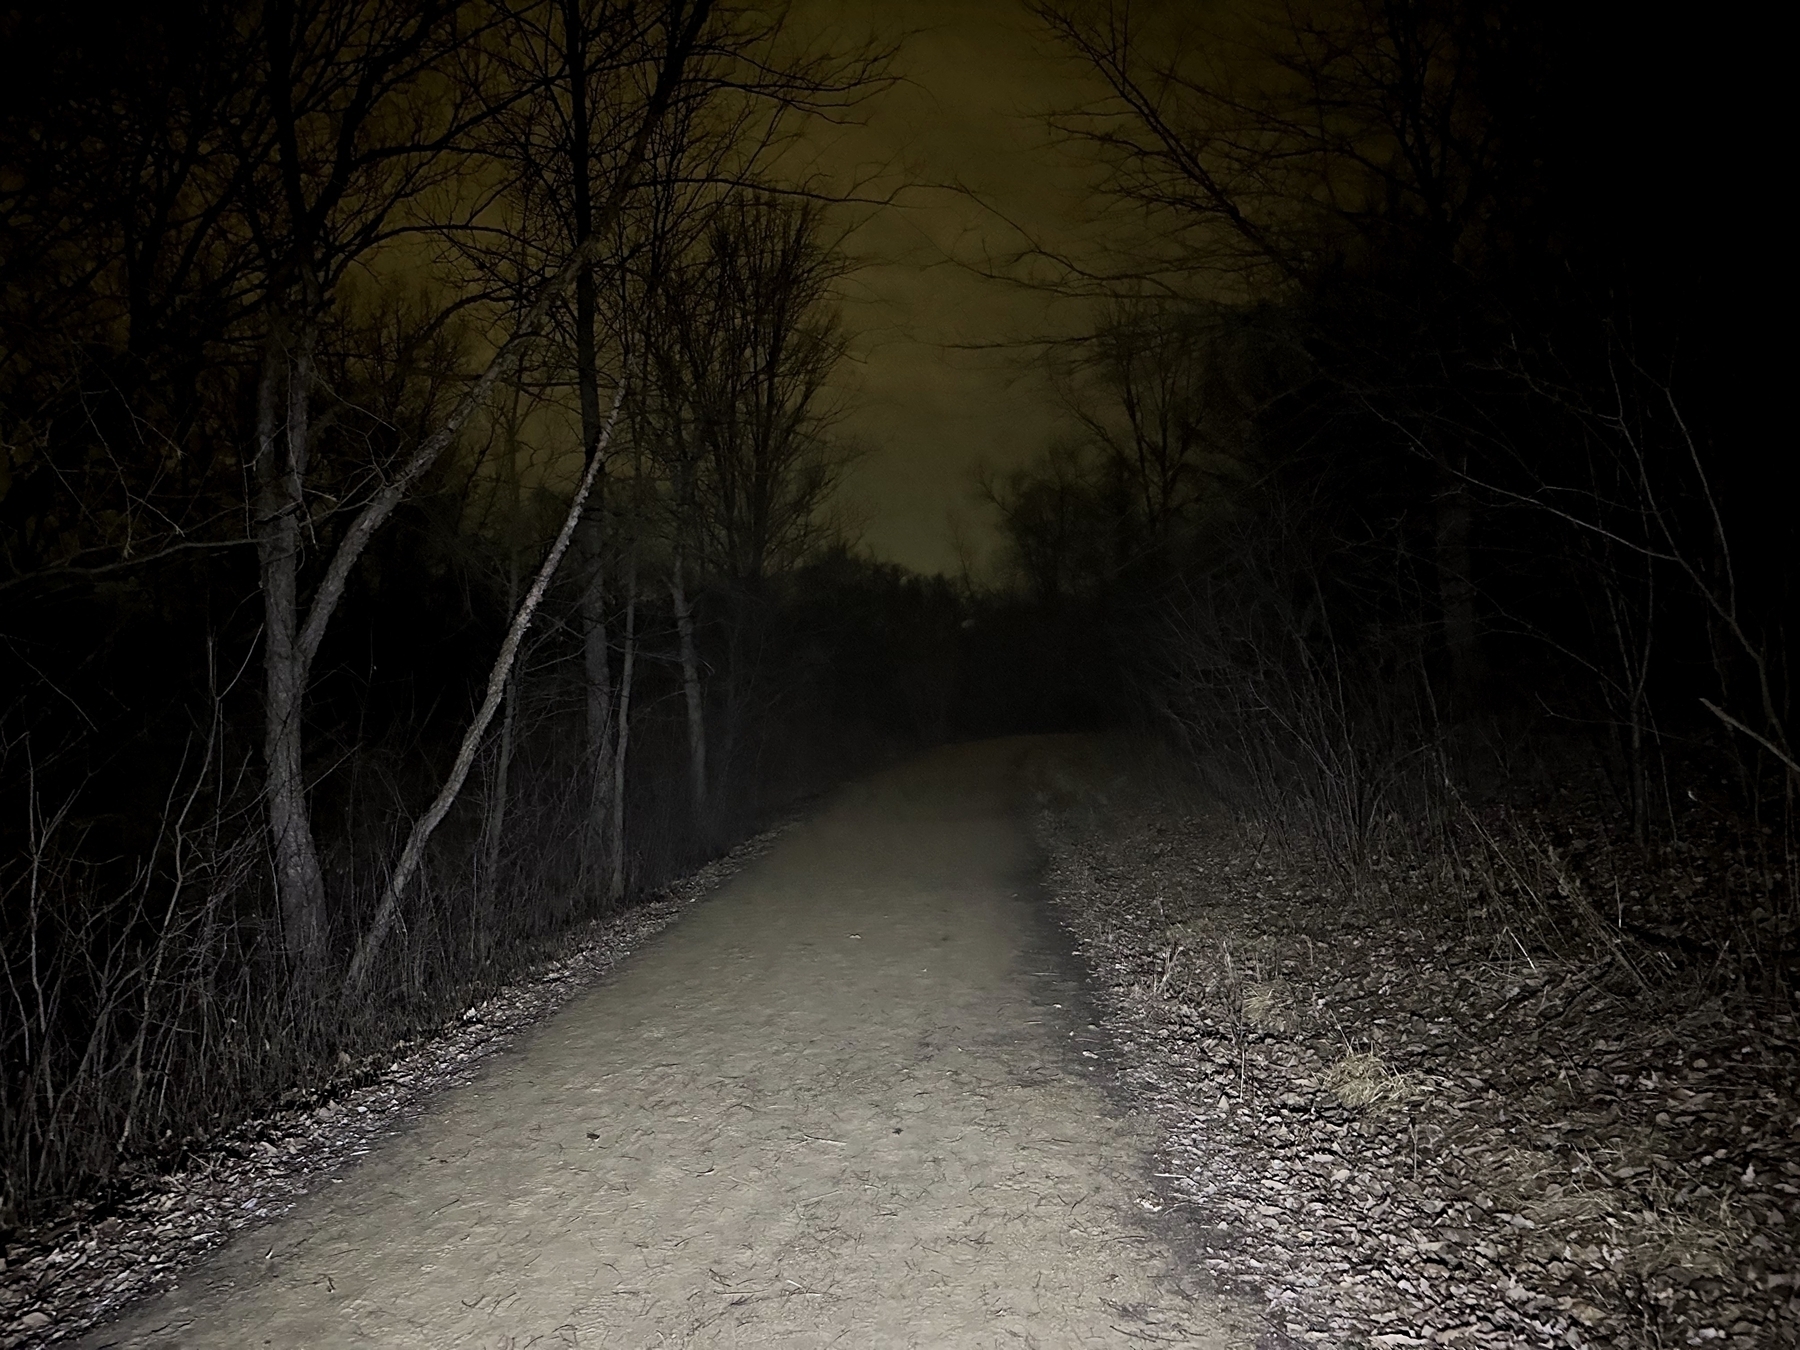 A dimly lit dirt path leads through a dense, dark forest at night, creating a moody and mysterious atmosphere.